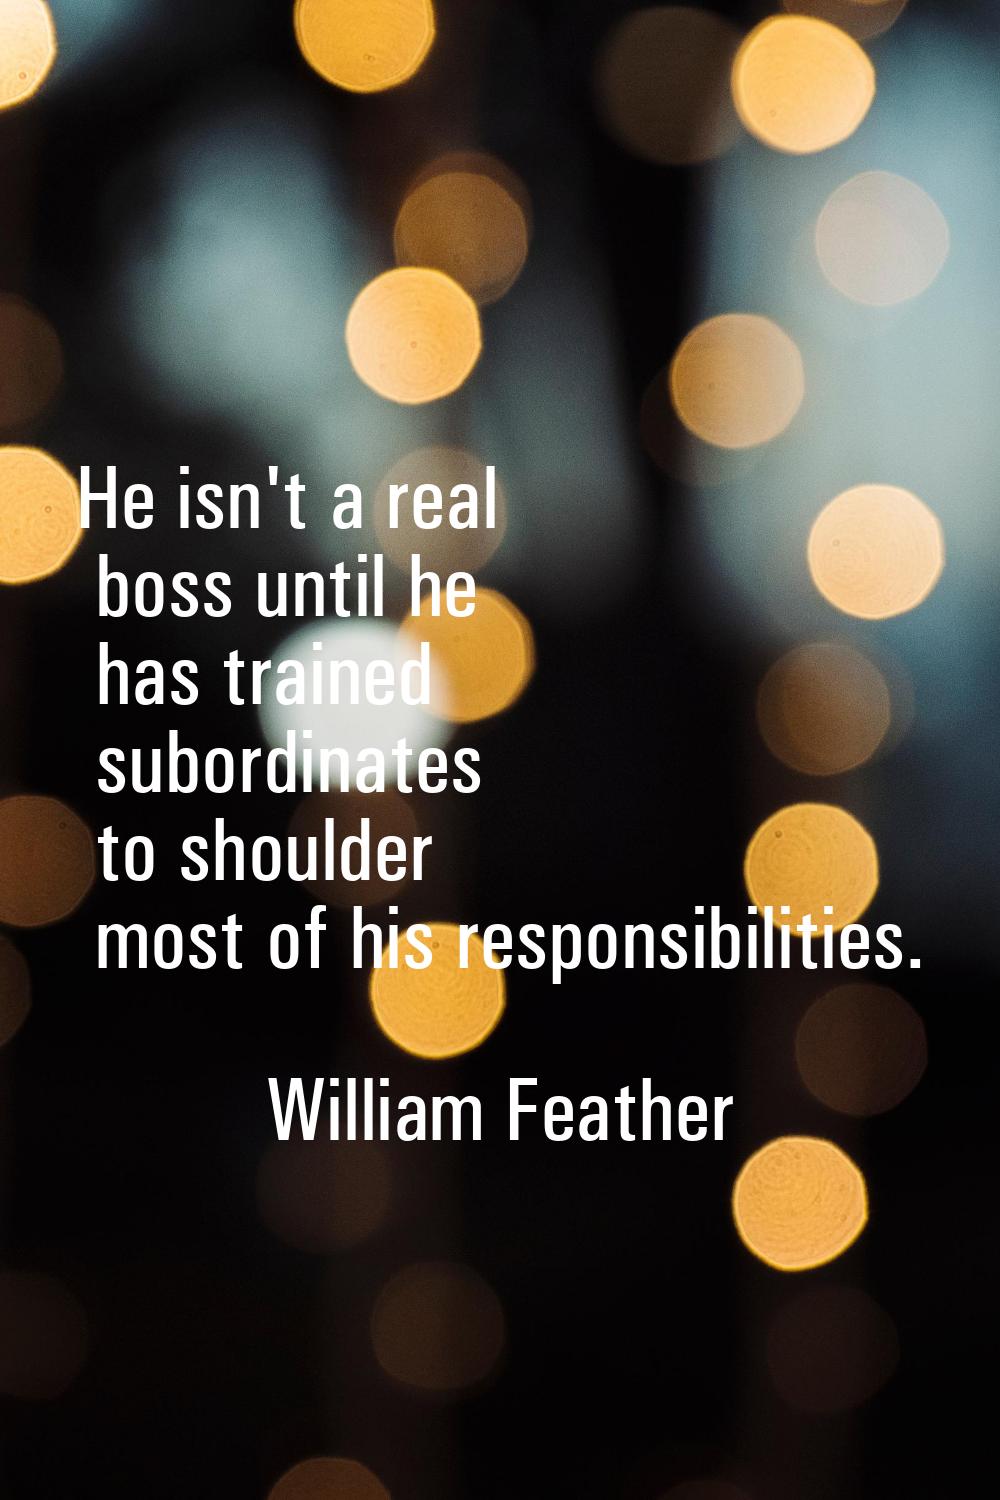 He isn't a real boss until he has trained subordinates to shoulder most of his responsibilities.